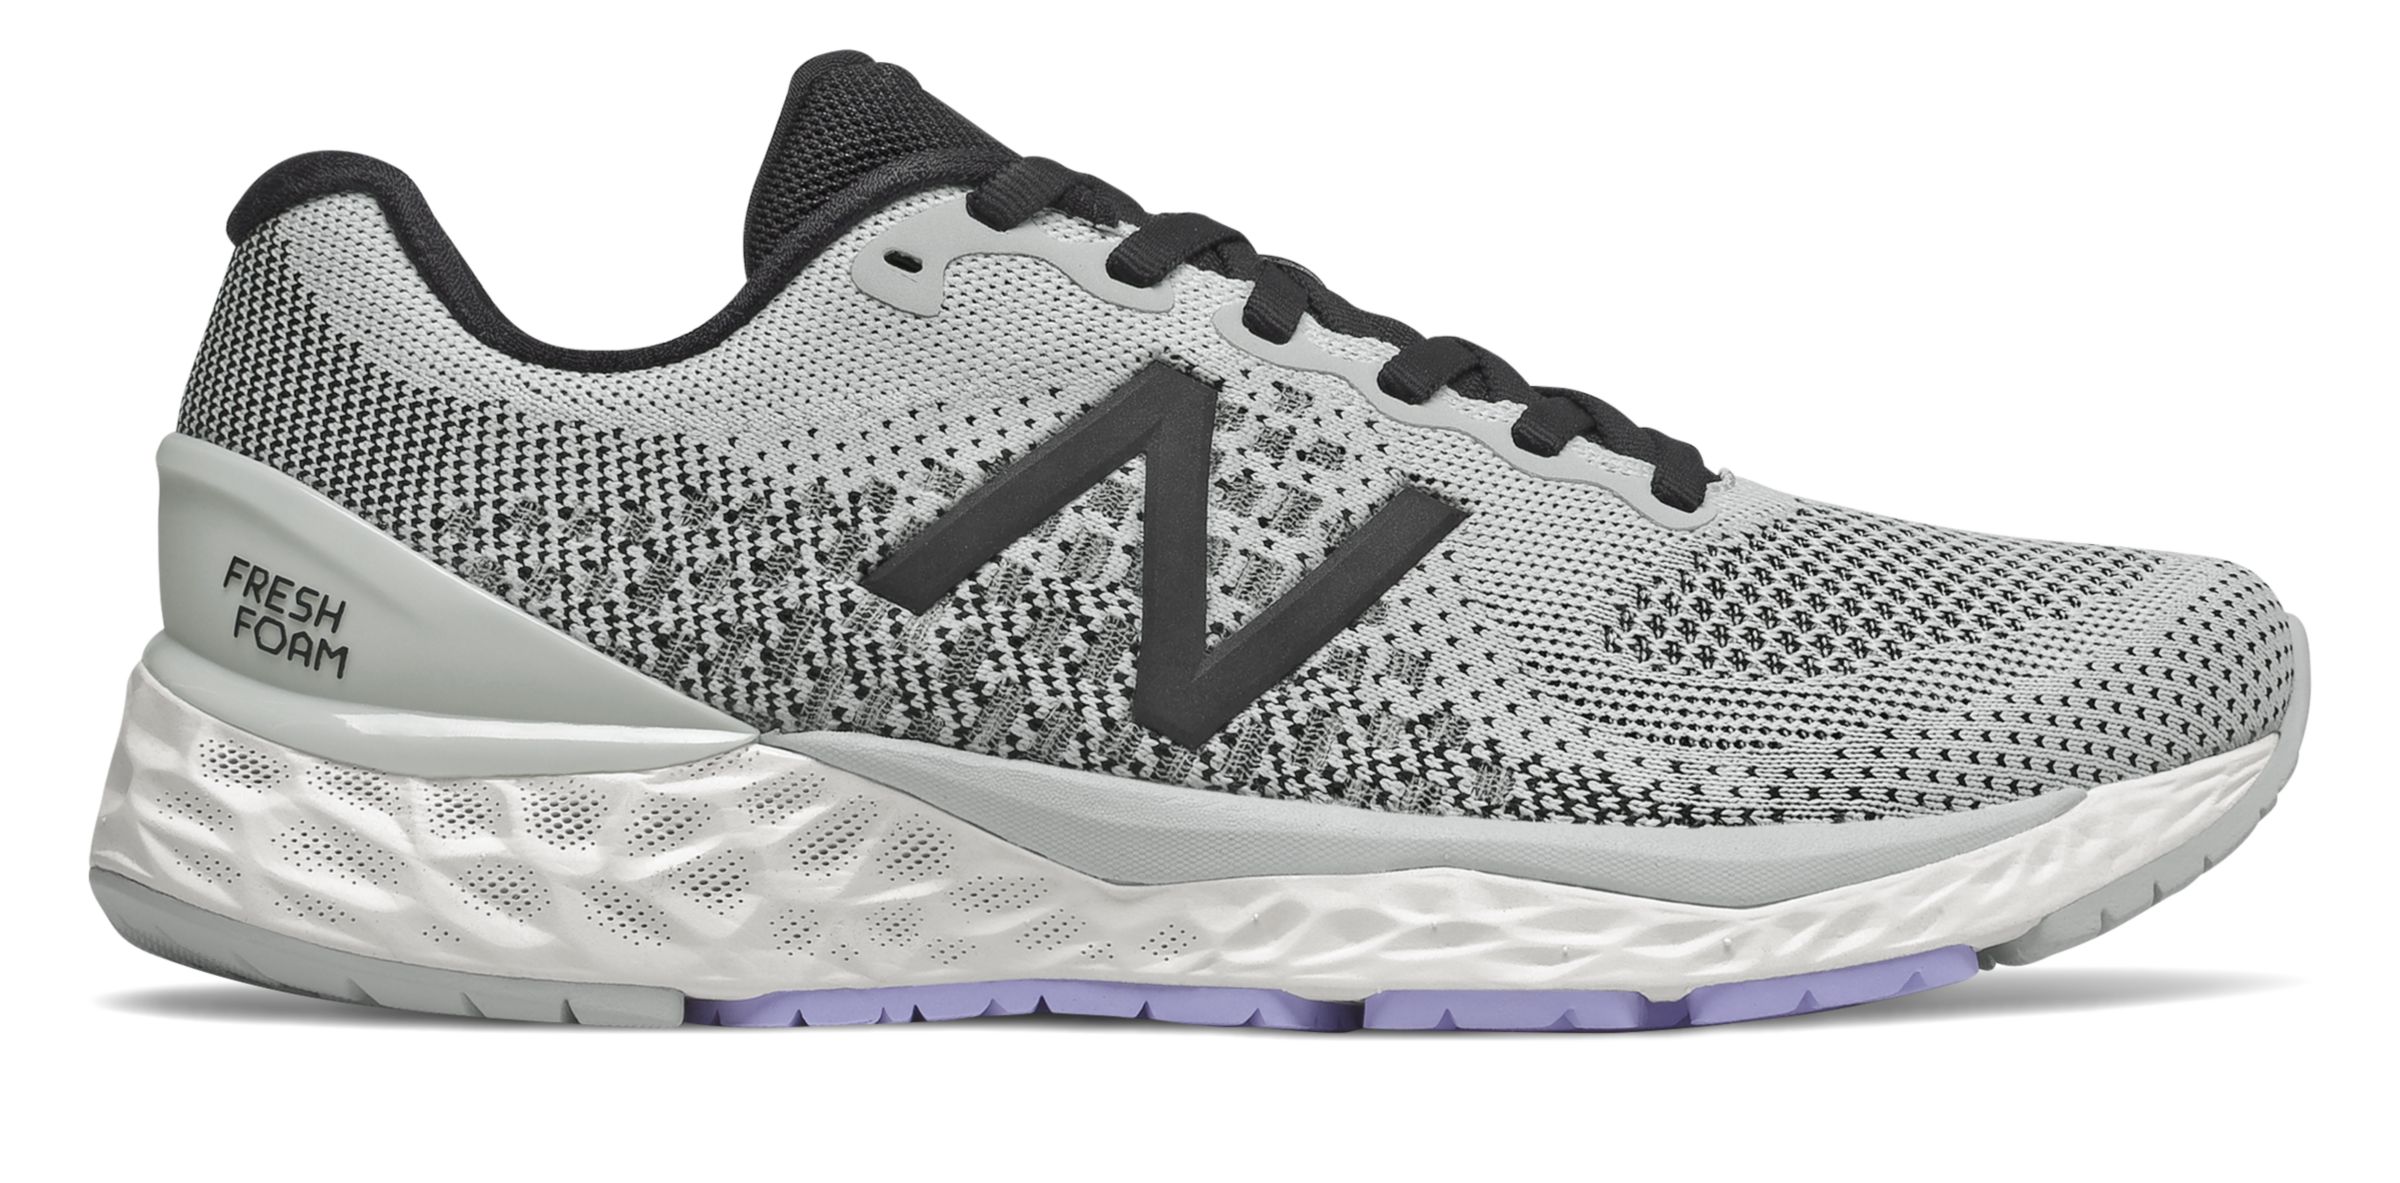 The 800 Series Running Shoes - New Balance